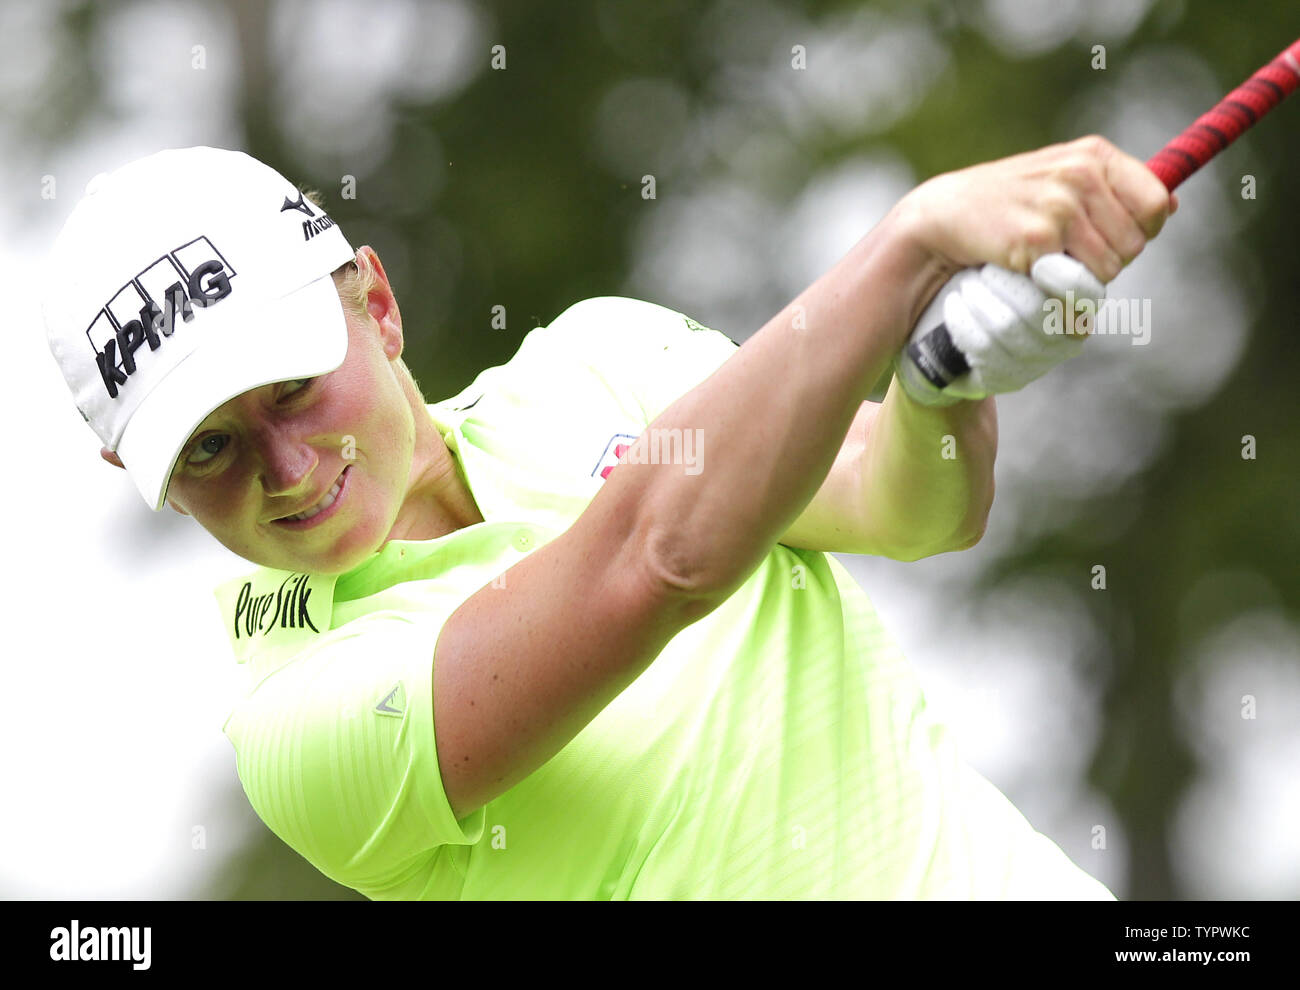 Stacy Lewis hits her tee shot on the second hole in the final round of the LPGA U.S. Women's Open Championship at Lancaster Country Club in Lancaster, PA on July 12, 2015.       Photo by John Angelillo/UPI Stock Photo